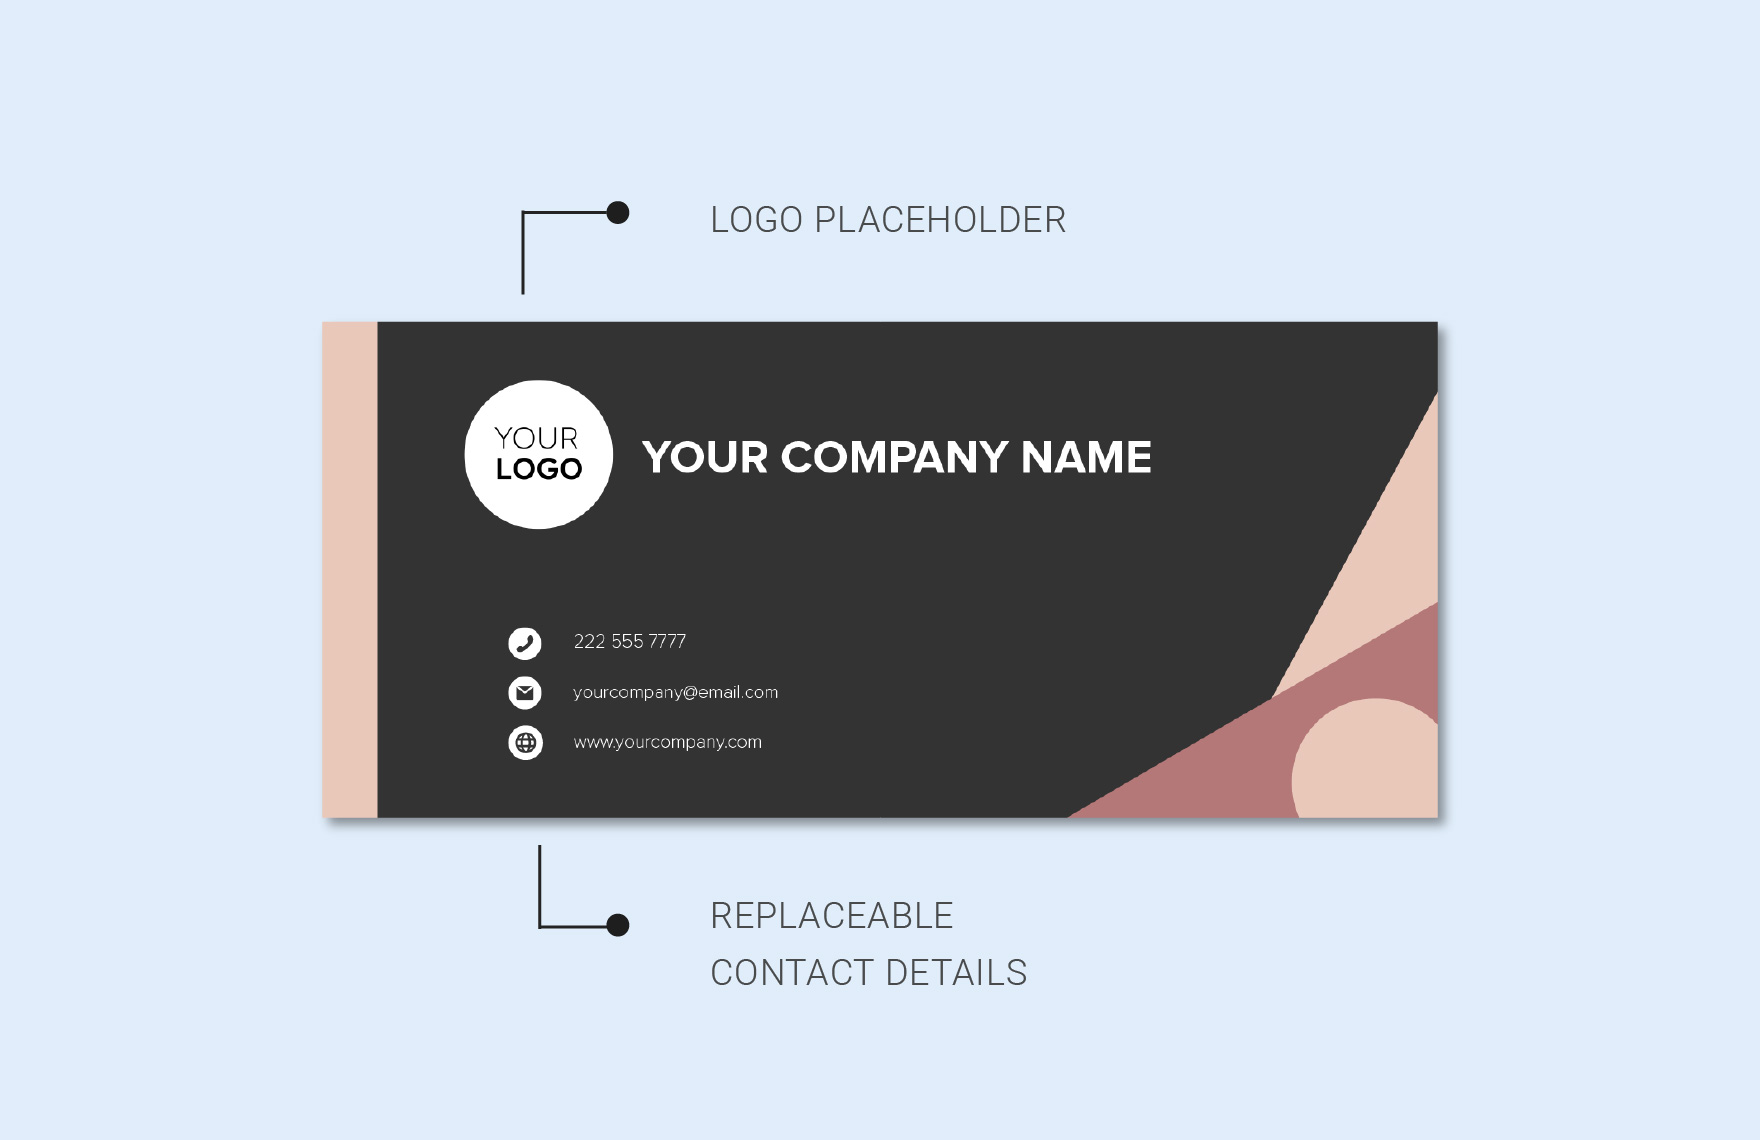 Envelope Layout Template